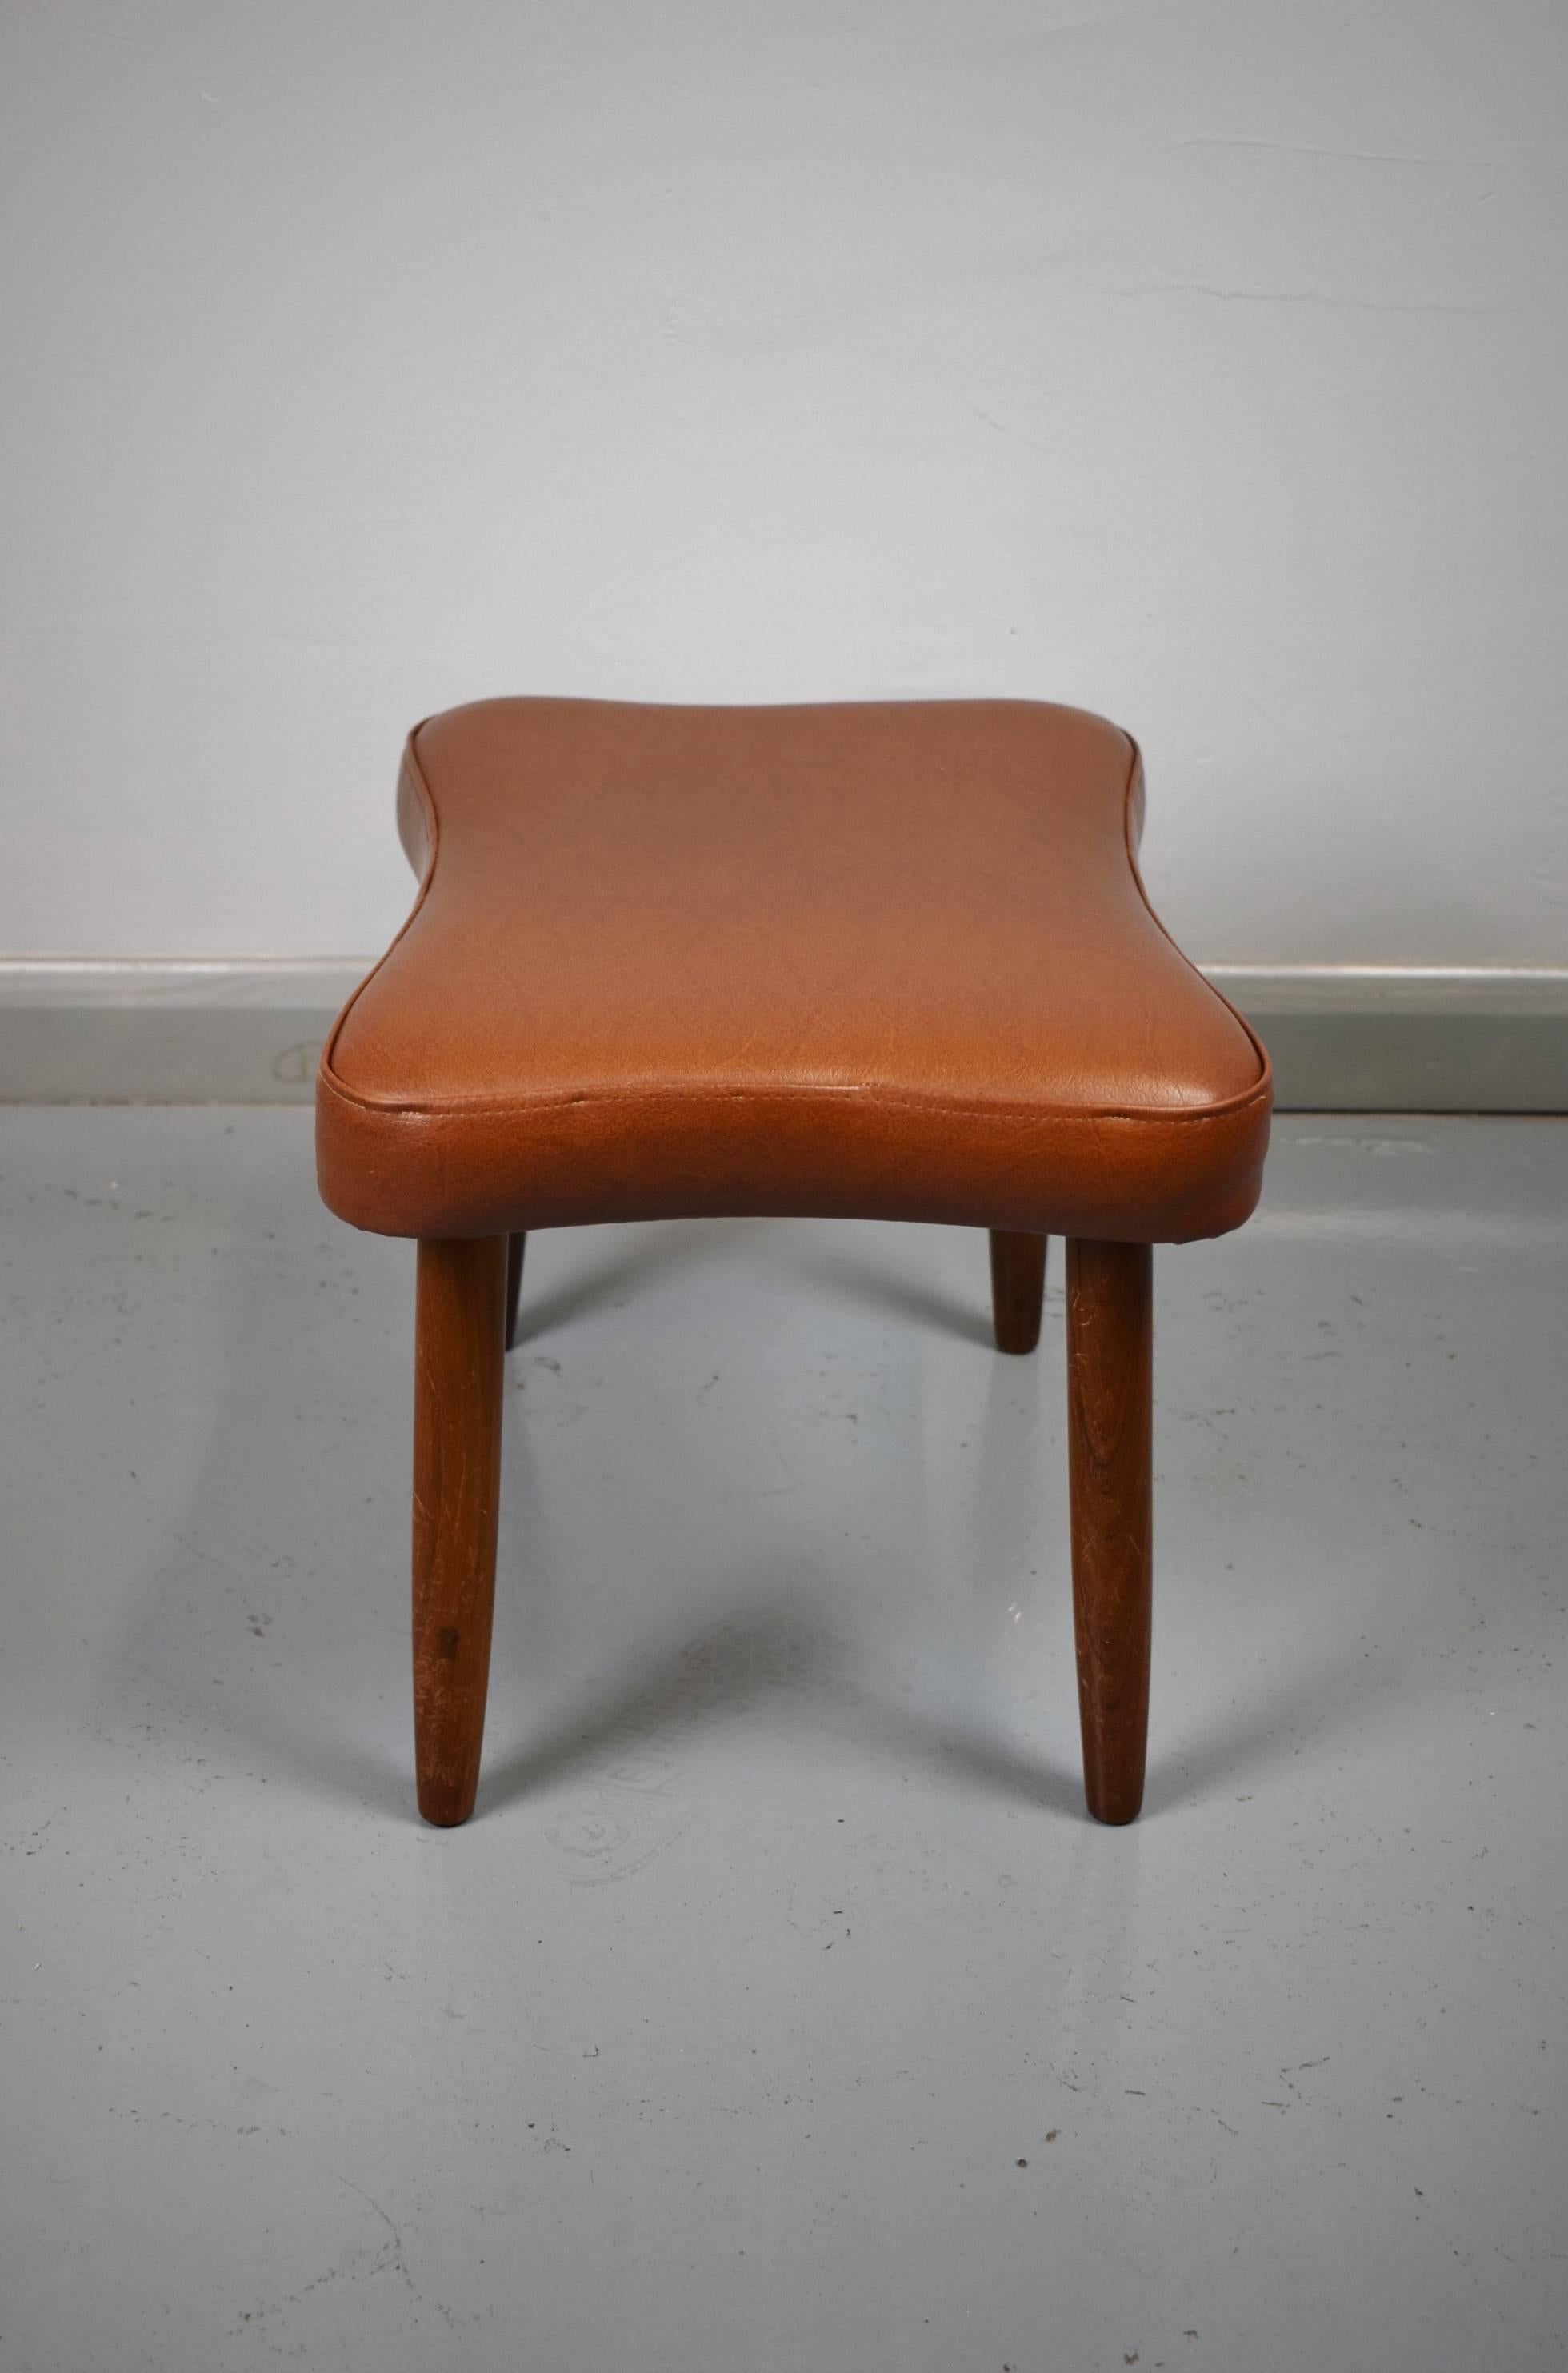 Designer: Danish Design

Manufacturer: Unknown

Country: Denmark

Date: 1960s

Material: Leather and Beech

Maximum Dimensions: 47cm wide, 36cm deep and 36cm tall.

Condition: Excellent with sturdy frame and no rips or tears to